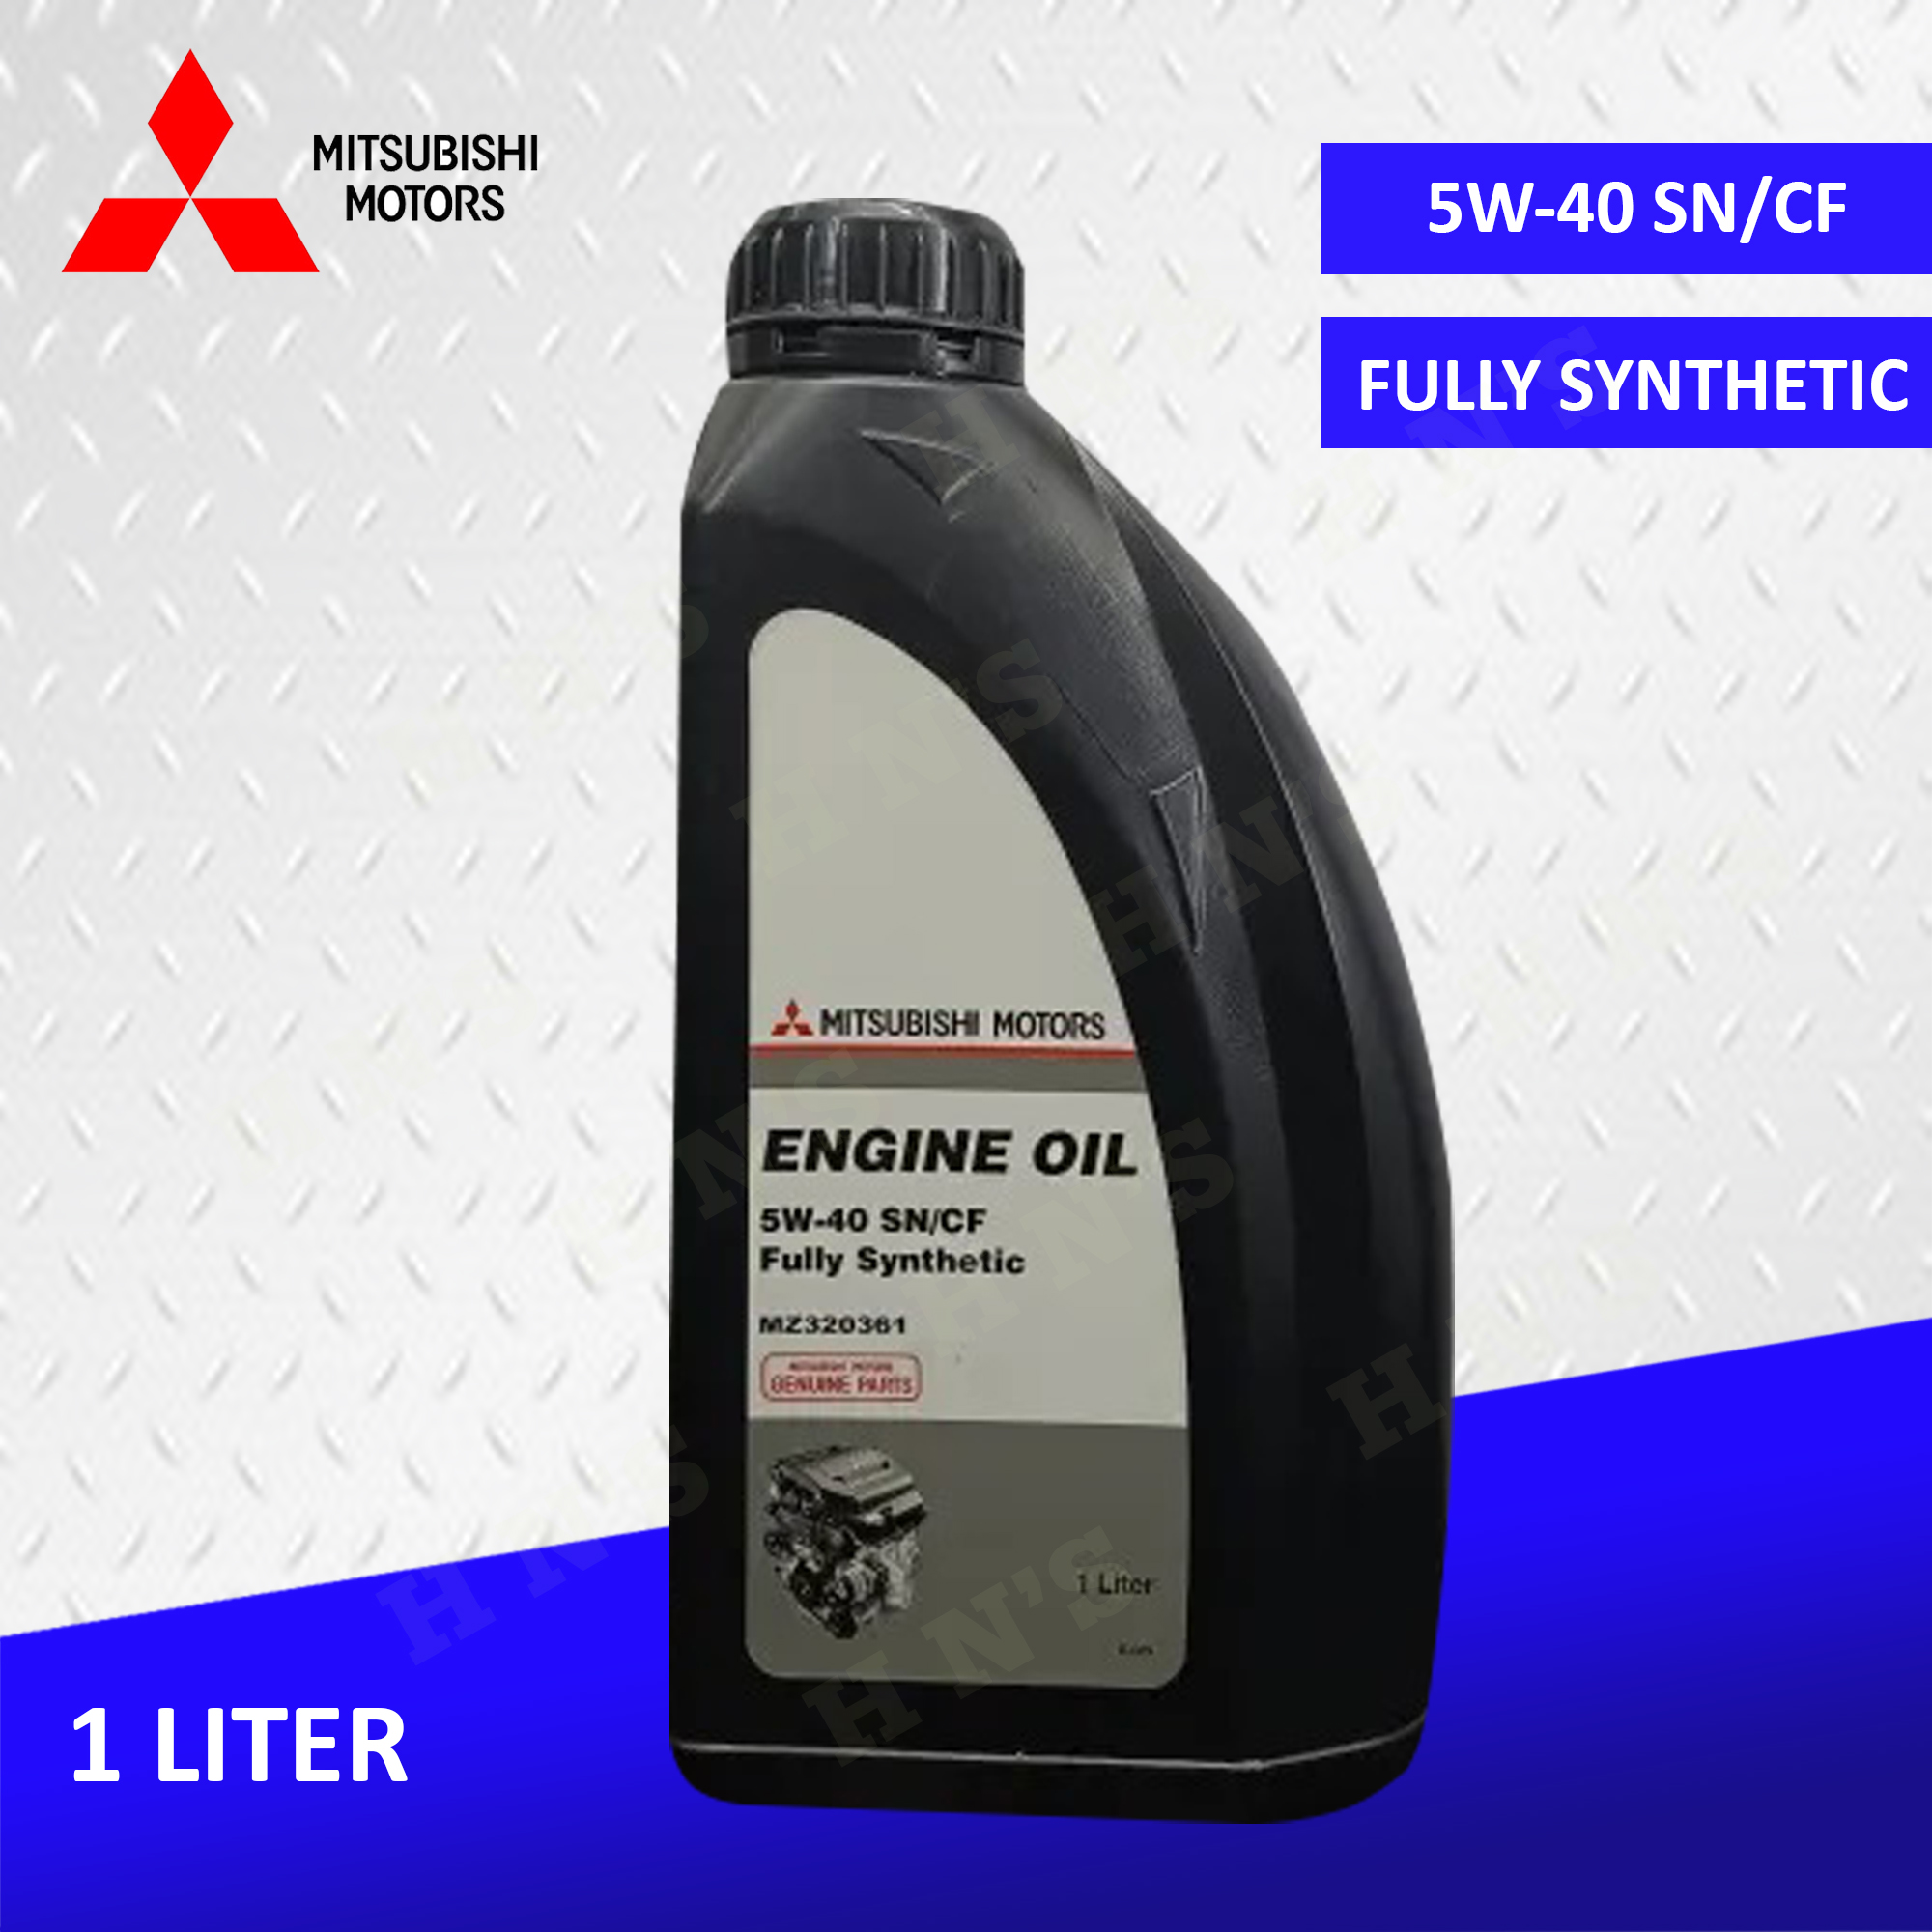 RAVENOL 5W40 NDT NORD DUTY FULLY SYNTHETIC OIL 7 LITERS WITH VIC OIL FILTER  BOSCH O 1036 / C-306 APPLICABLE FOR MITSUBISHI 4D56 ENGINE STRADA, MONTERO,  PAJERO